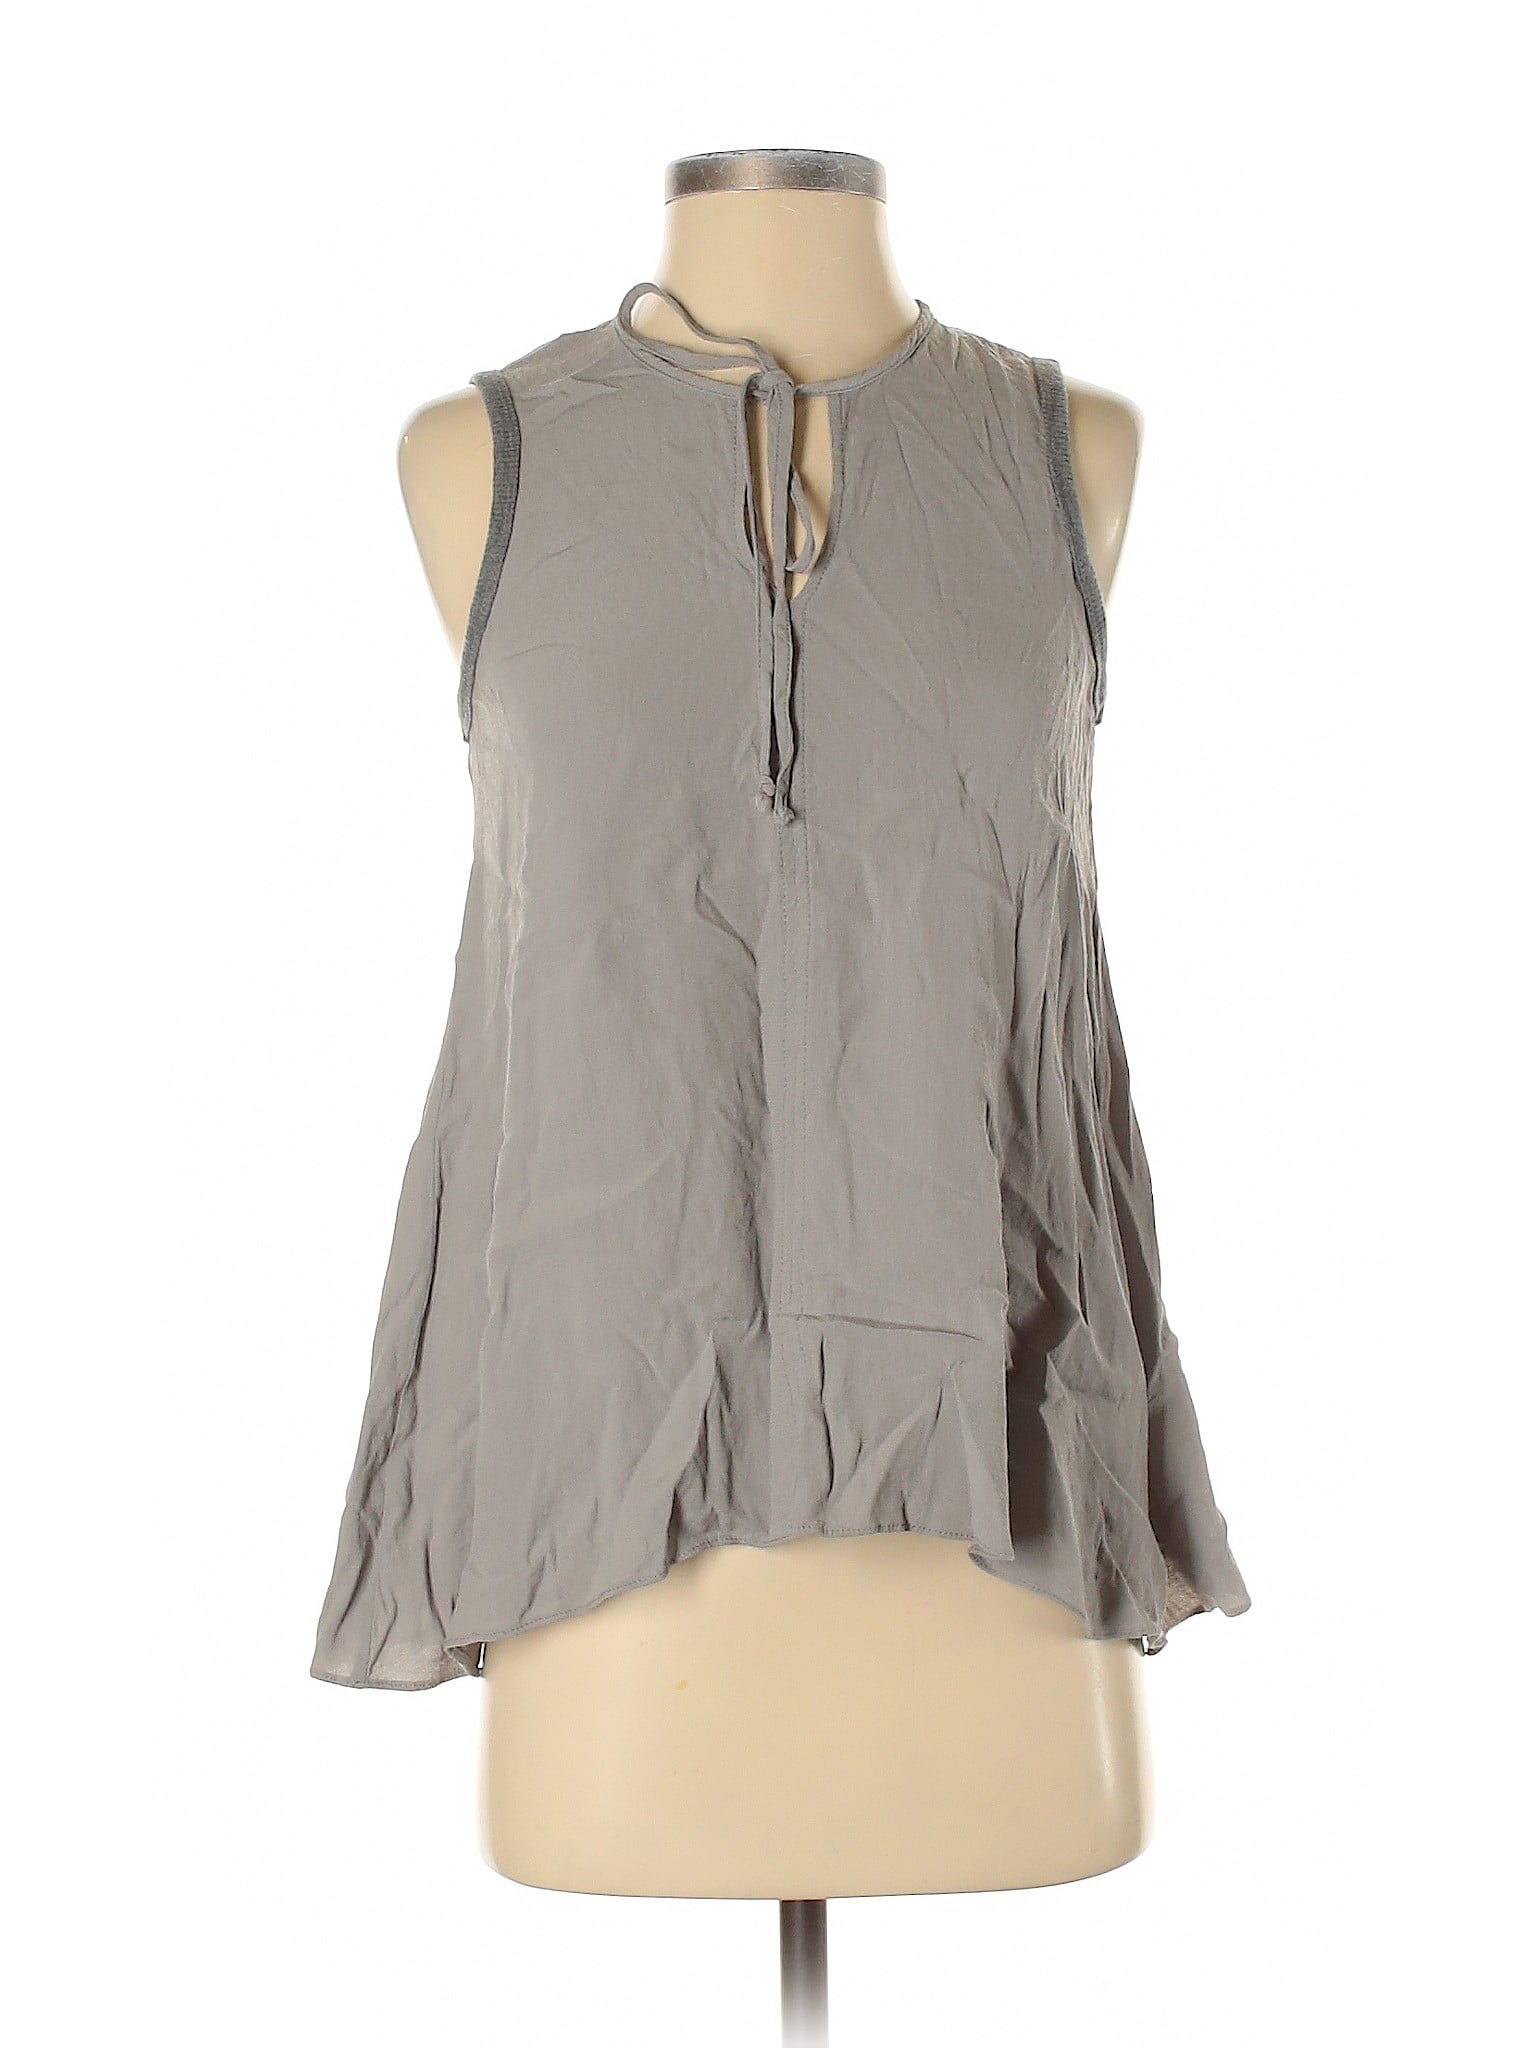 Lola & Sophie - Pre-Owned Lola & Sophie Women's Size XS Sleeveless ...